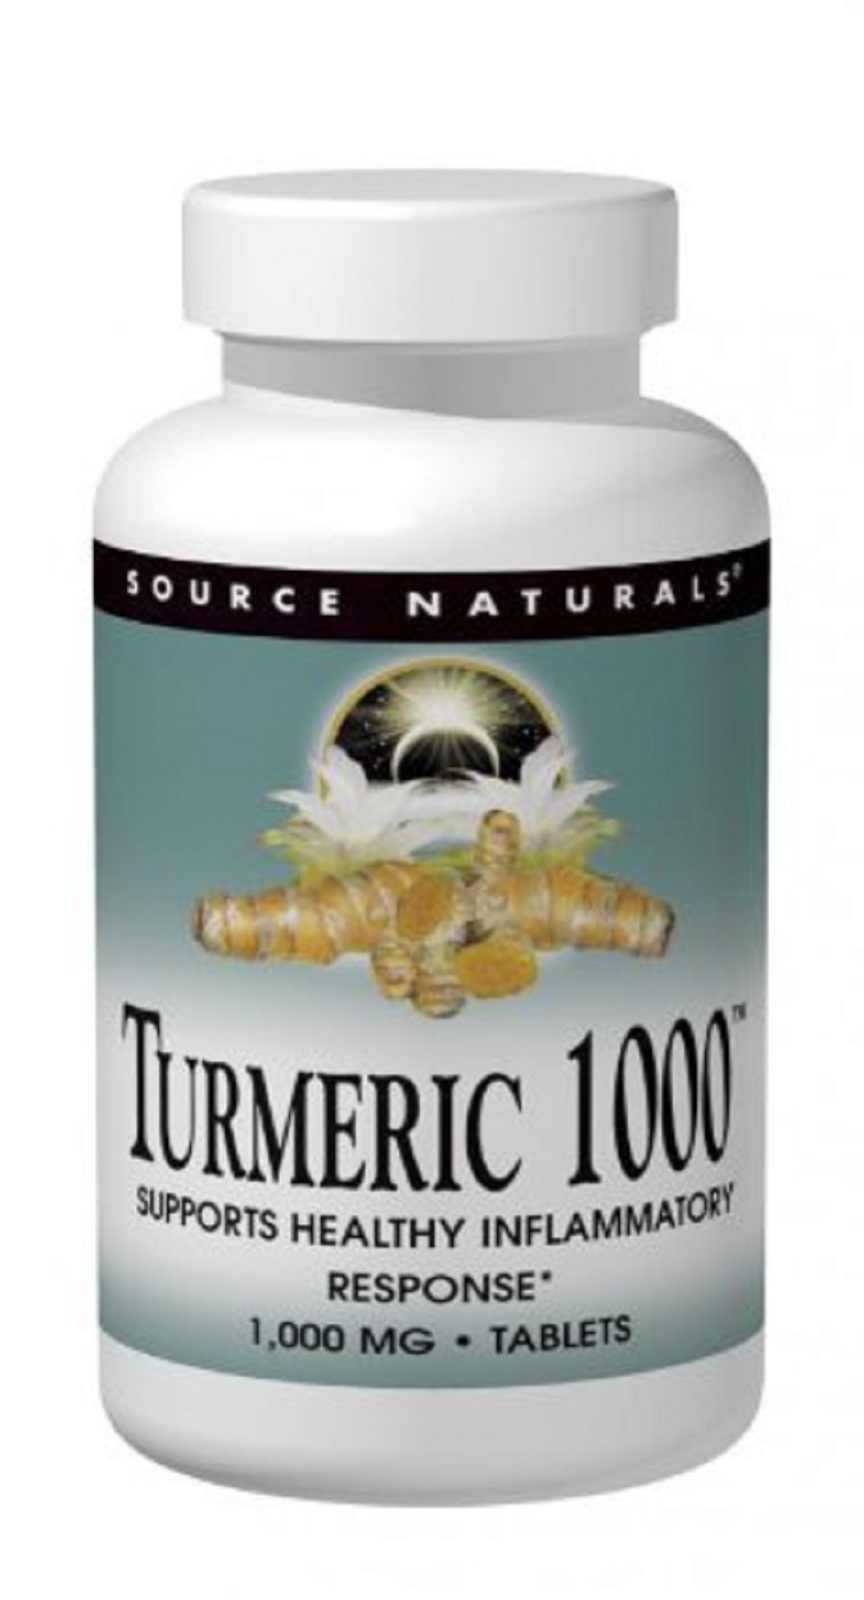 Source Naturals Turmeric 1000, Supports Healthy Inflammatory Response, 120 Tabs